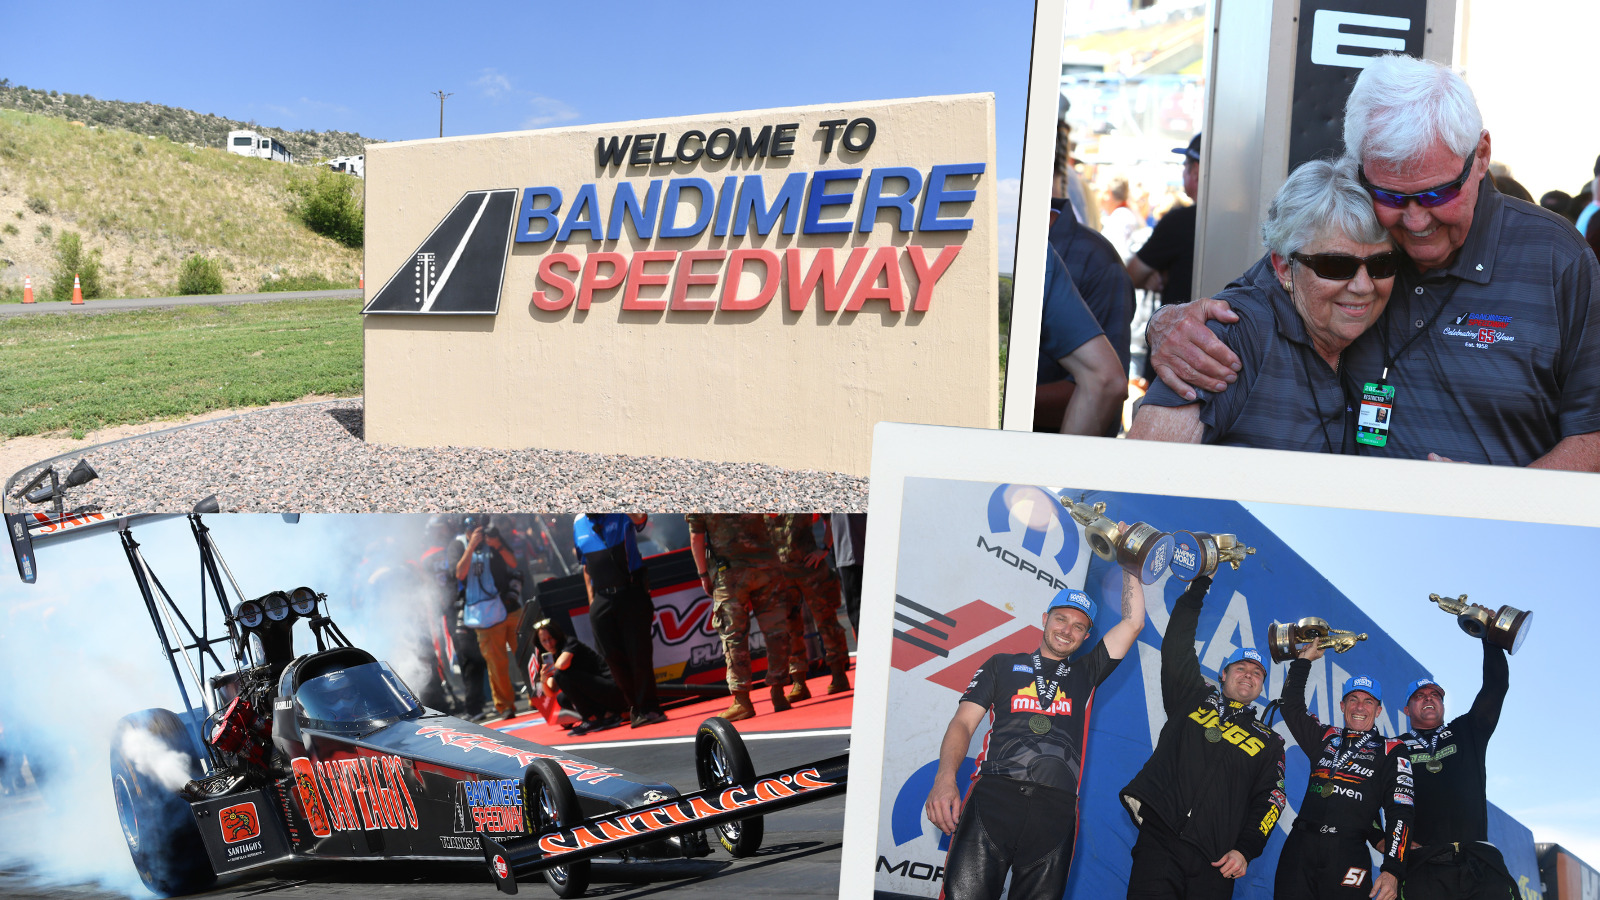 Saying Goodbye to Bandimere Speedway at the Final NHRA Mile-High Nationals, Drag Illustrated